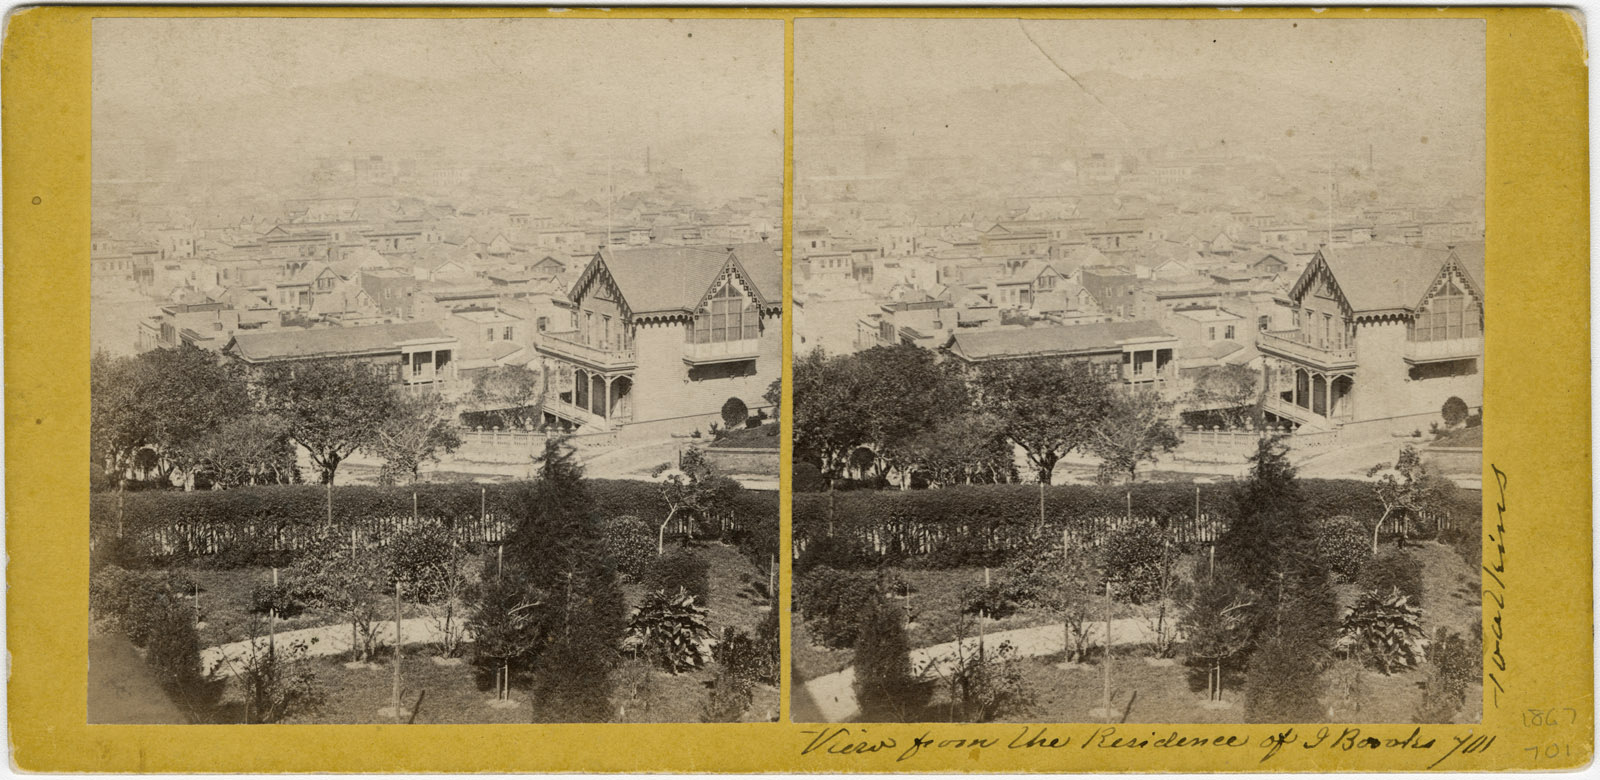 Watkins #701 - View from the Residence of J Books (?)